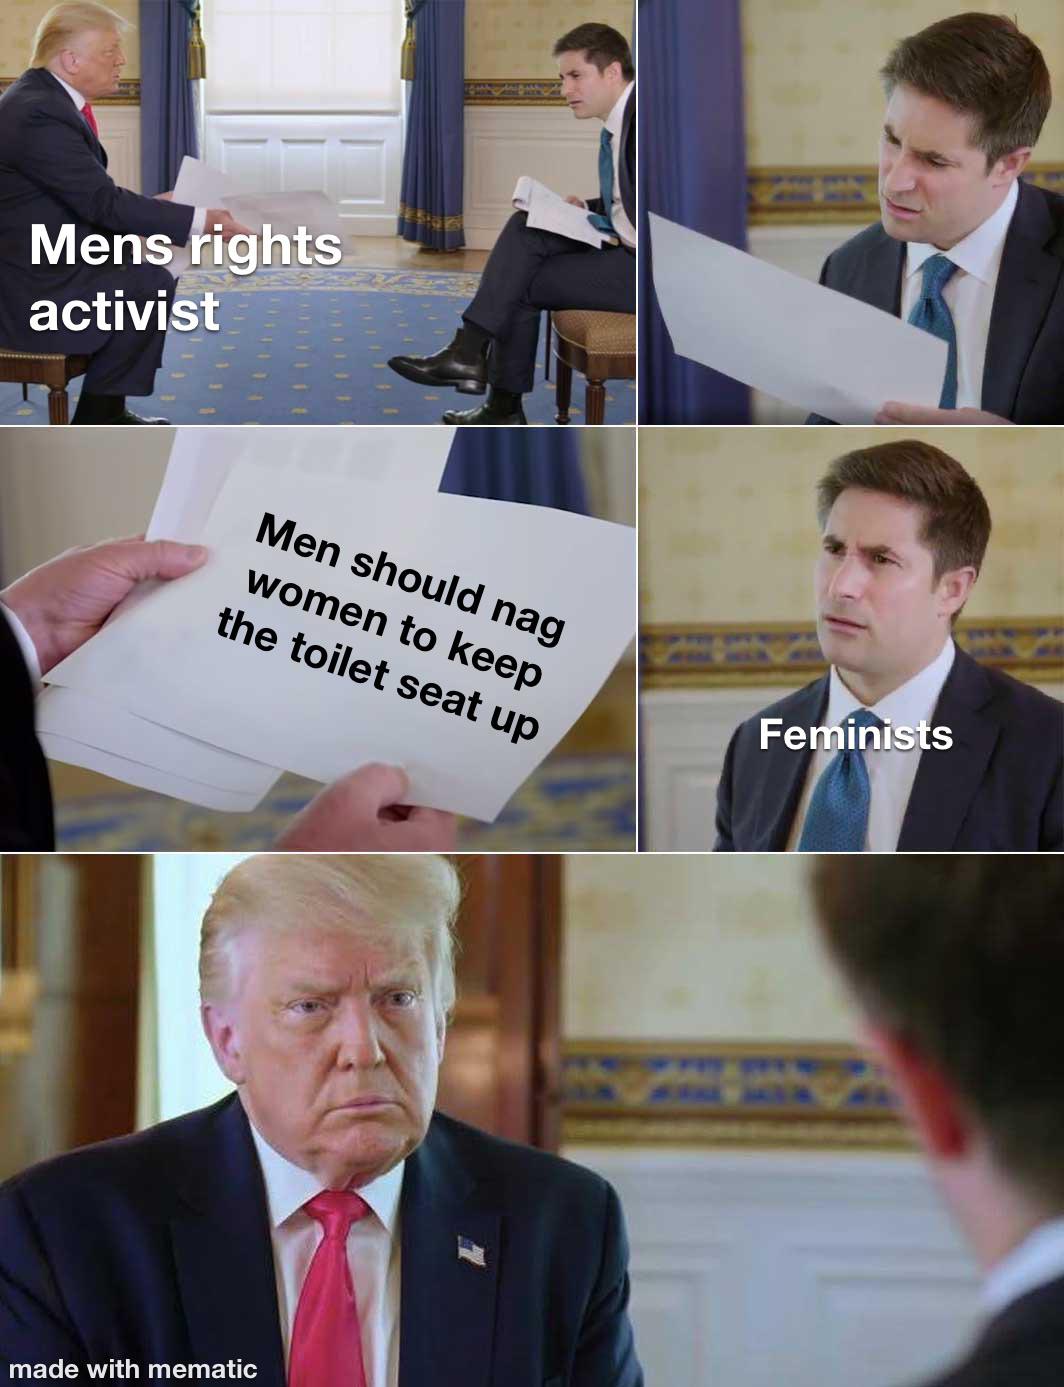 trump jonathan swan meme template - Mens rights activist Men should nag women to keep the toilet seat up Feminists made with mematic